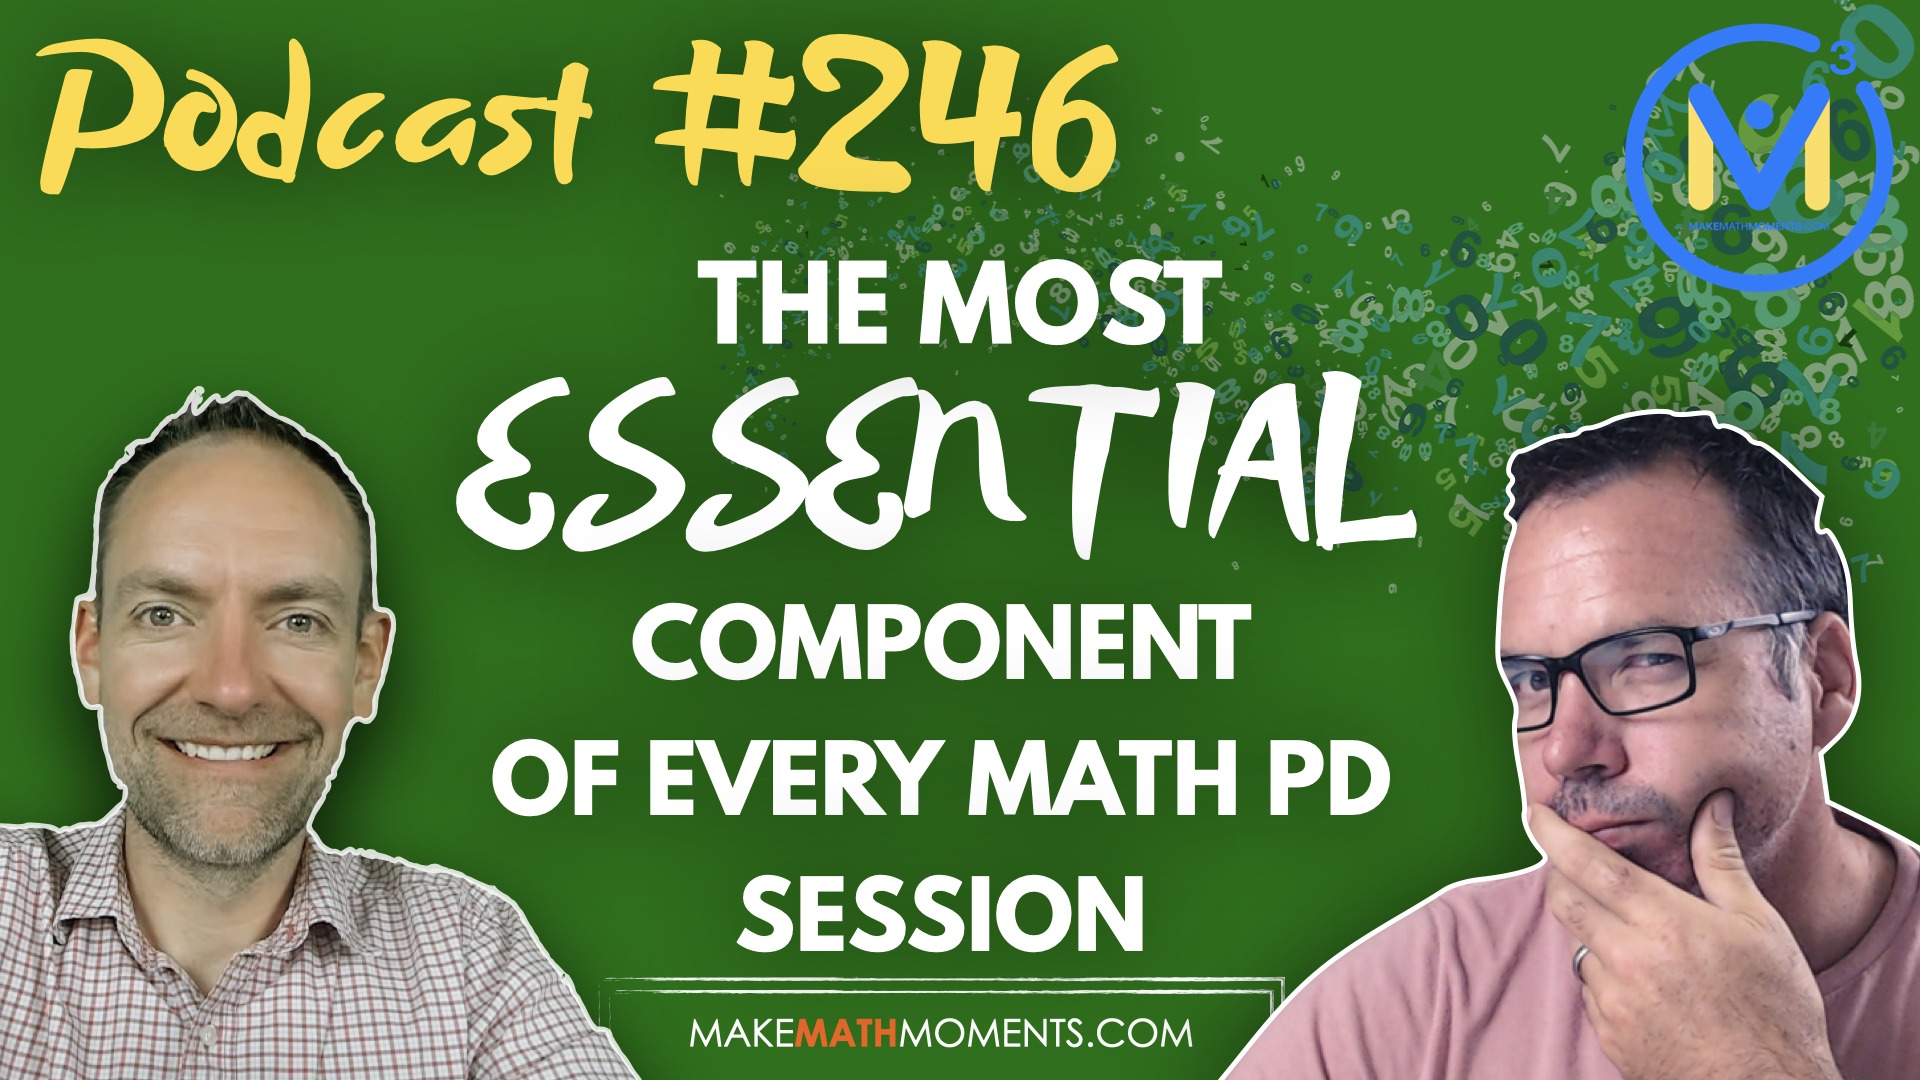 Episode #246: What You’ve Missed: The Most Essential Component of Every Math PD Session